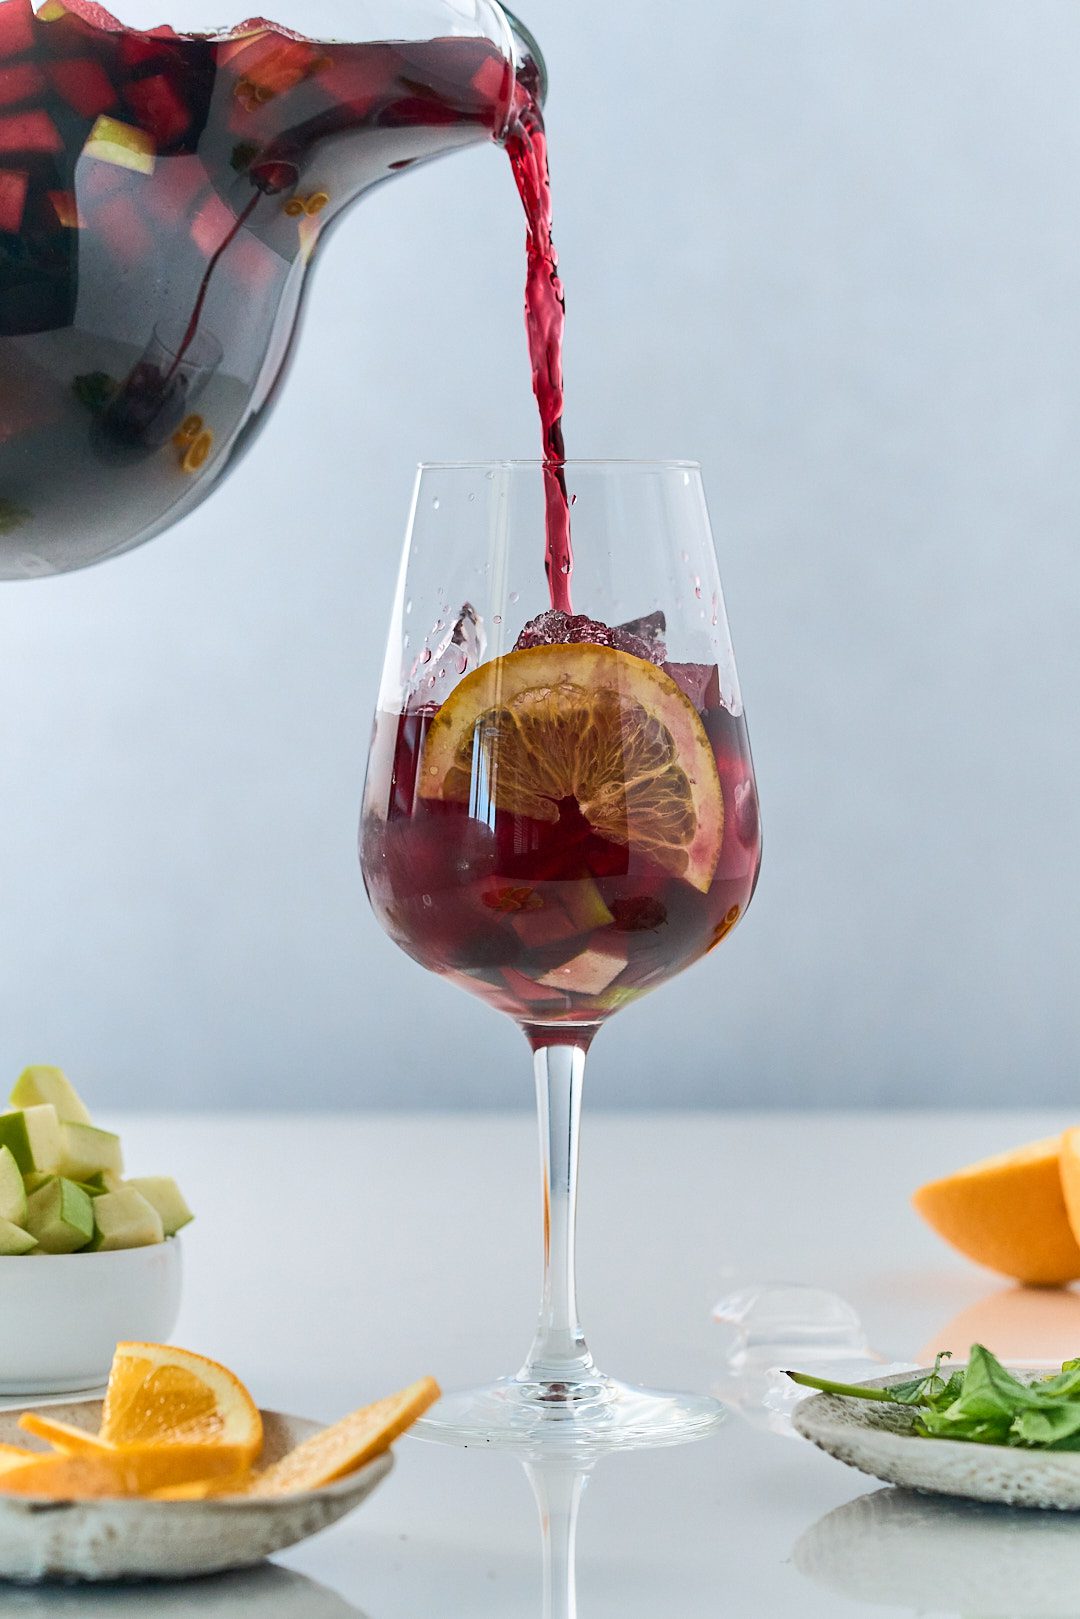 Sangria being served on a glass.